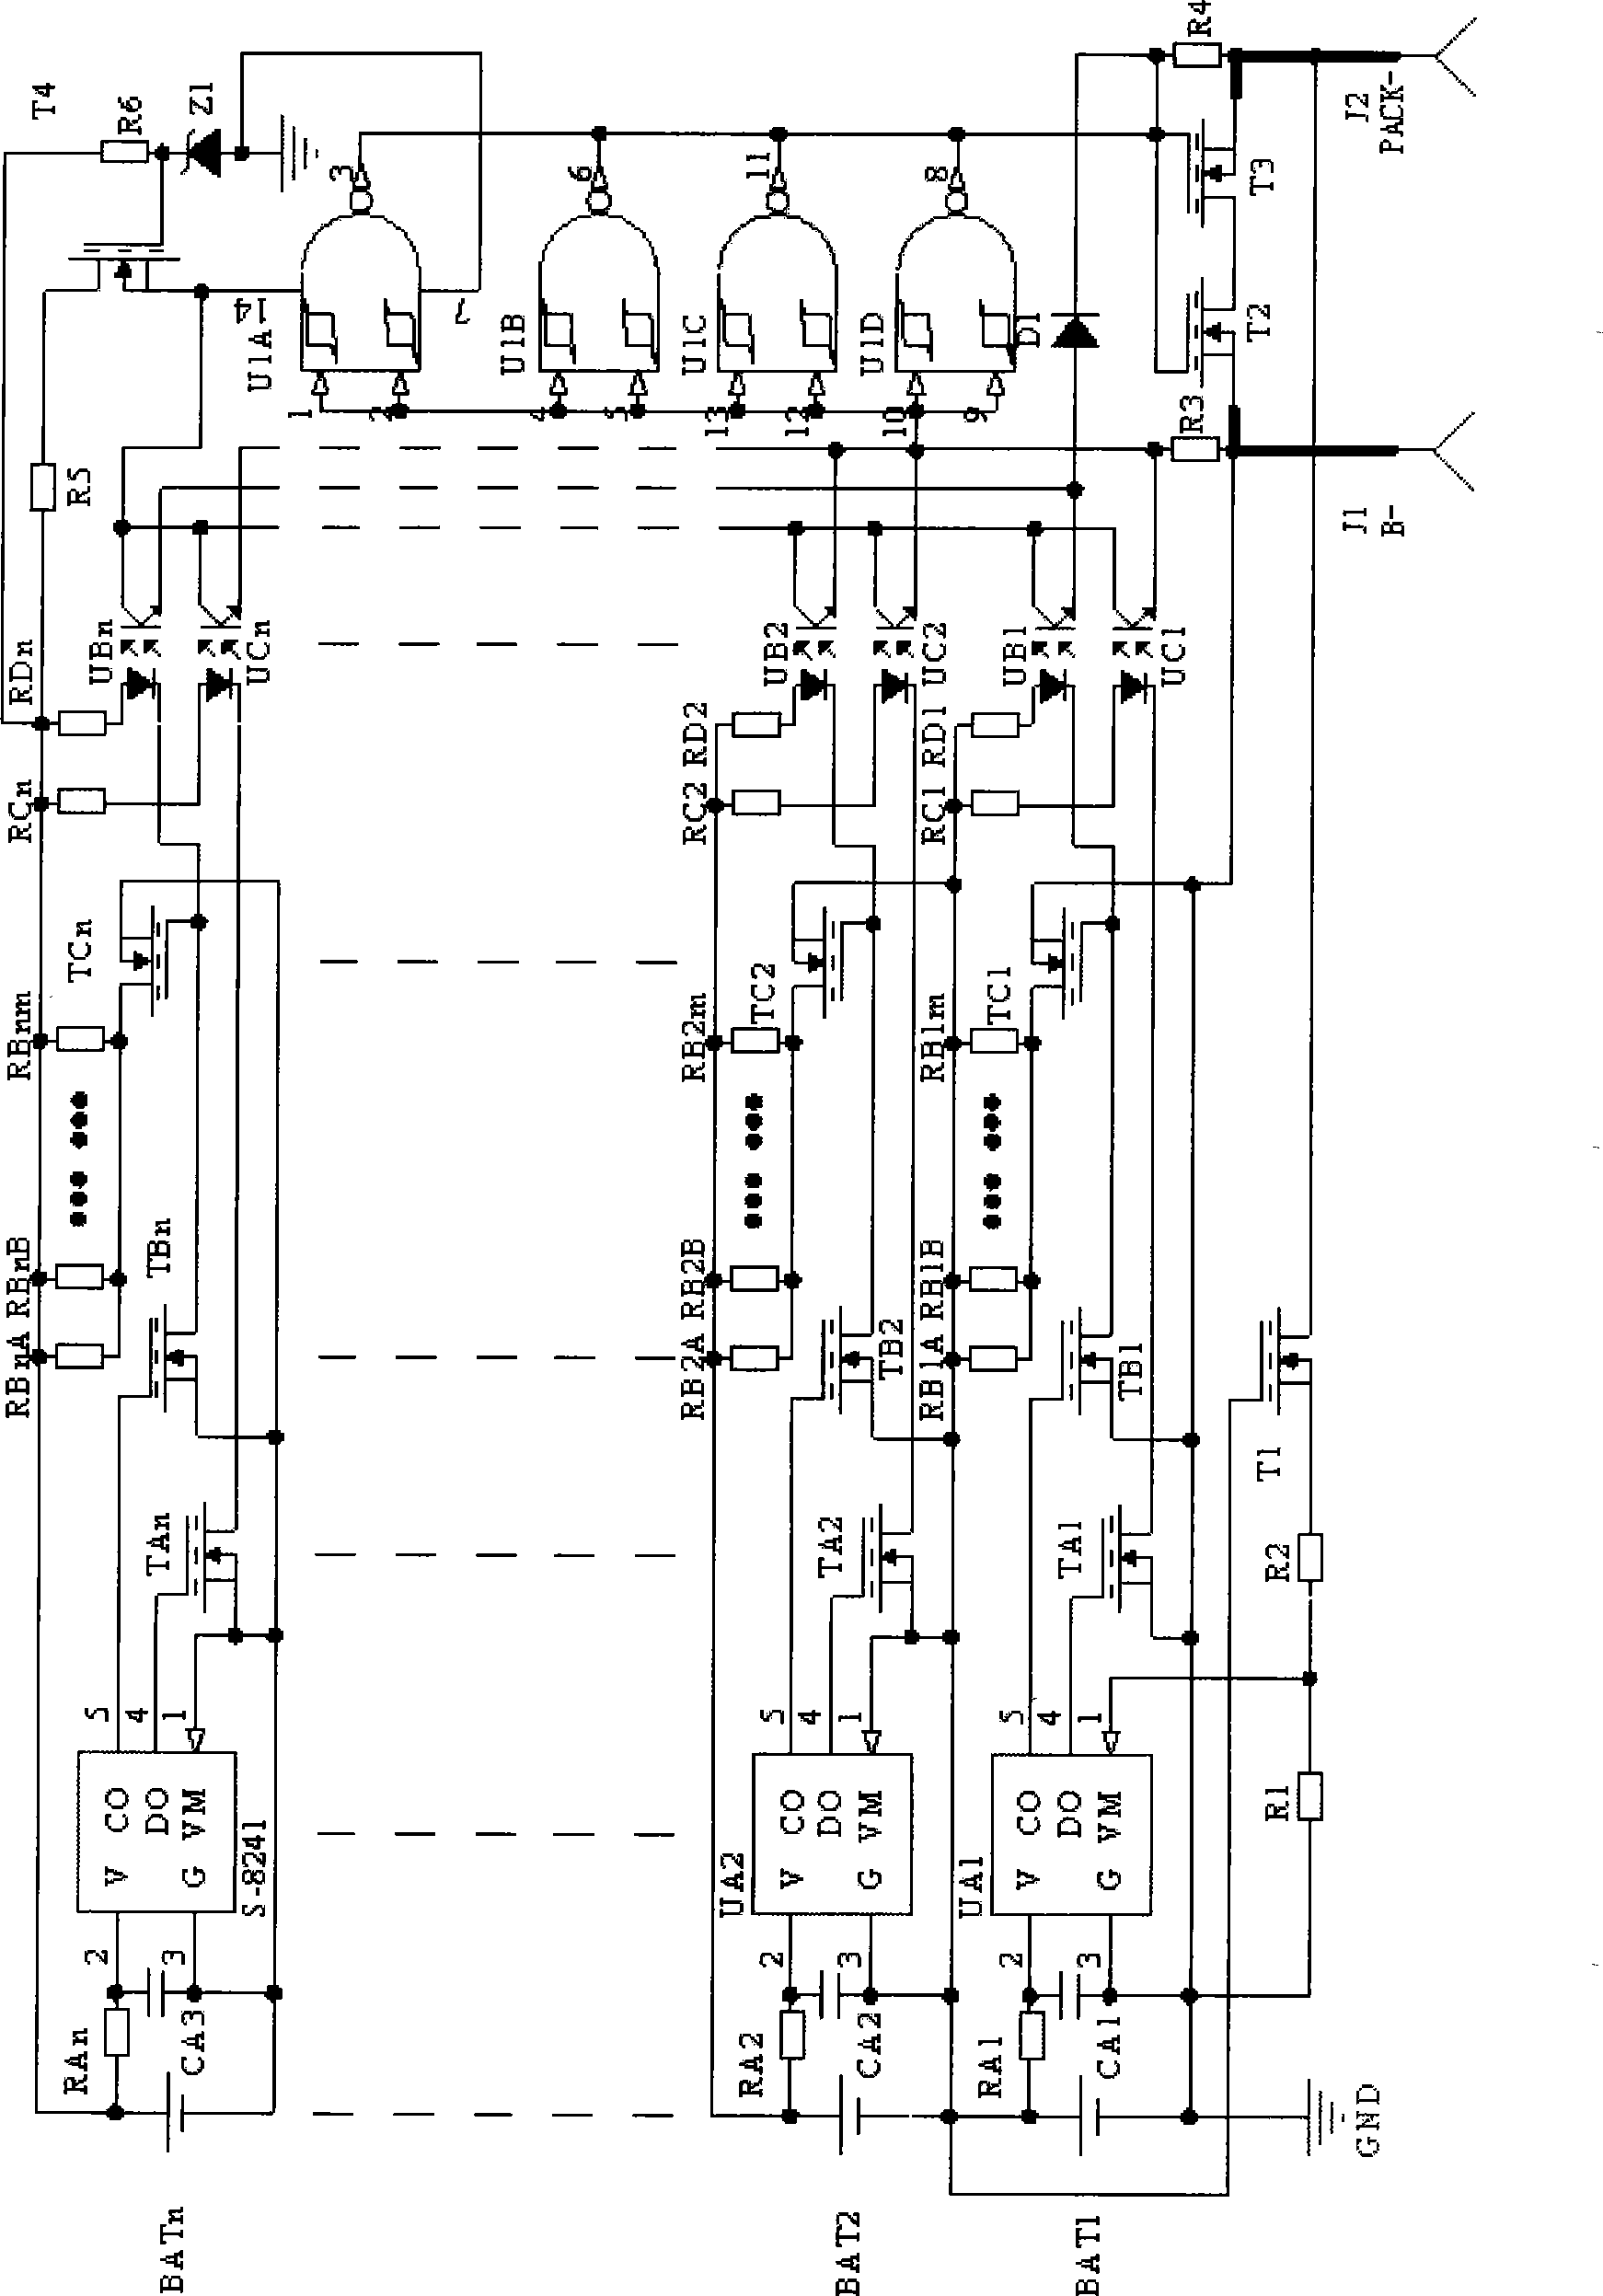 Cascade combined protection equilibrium module for large-capacity lithium ion battery